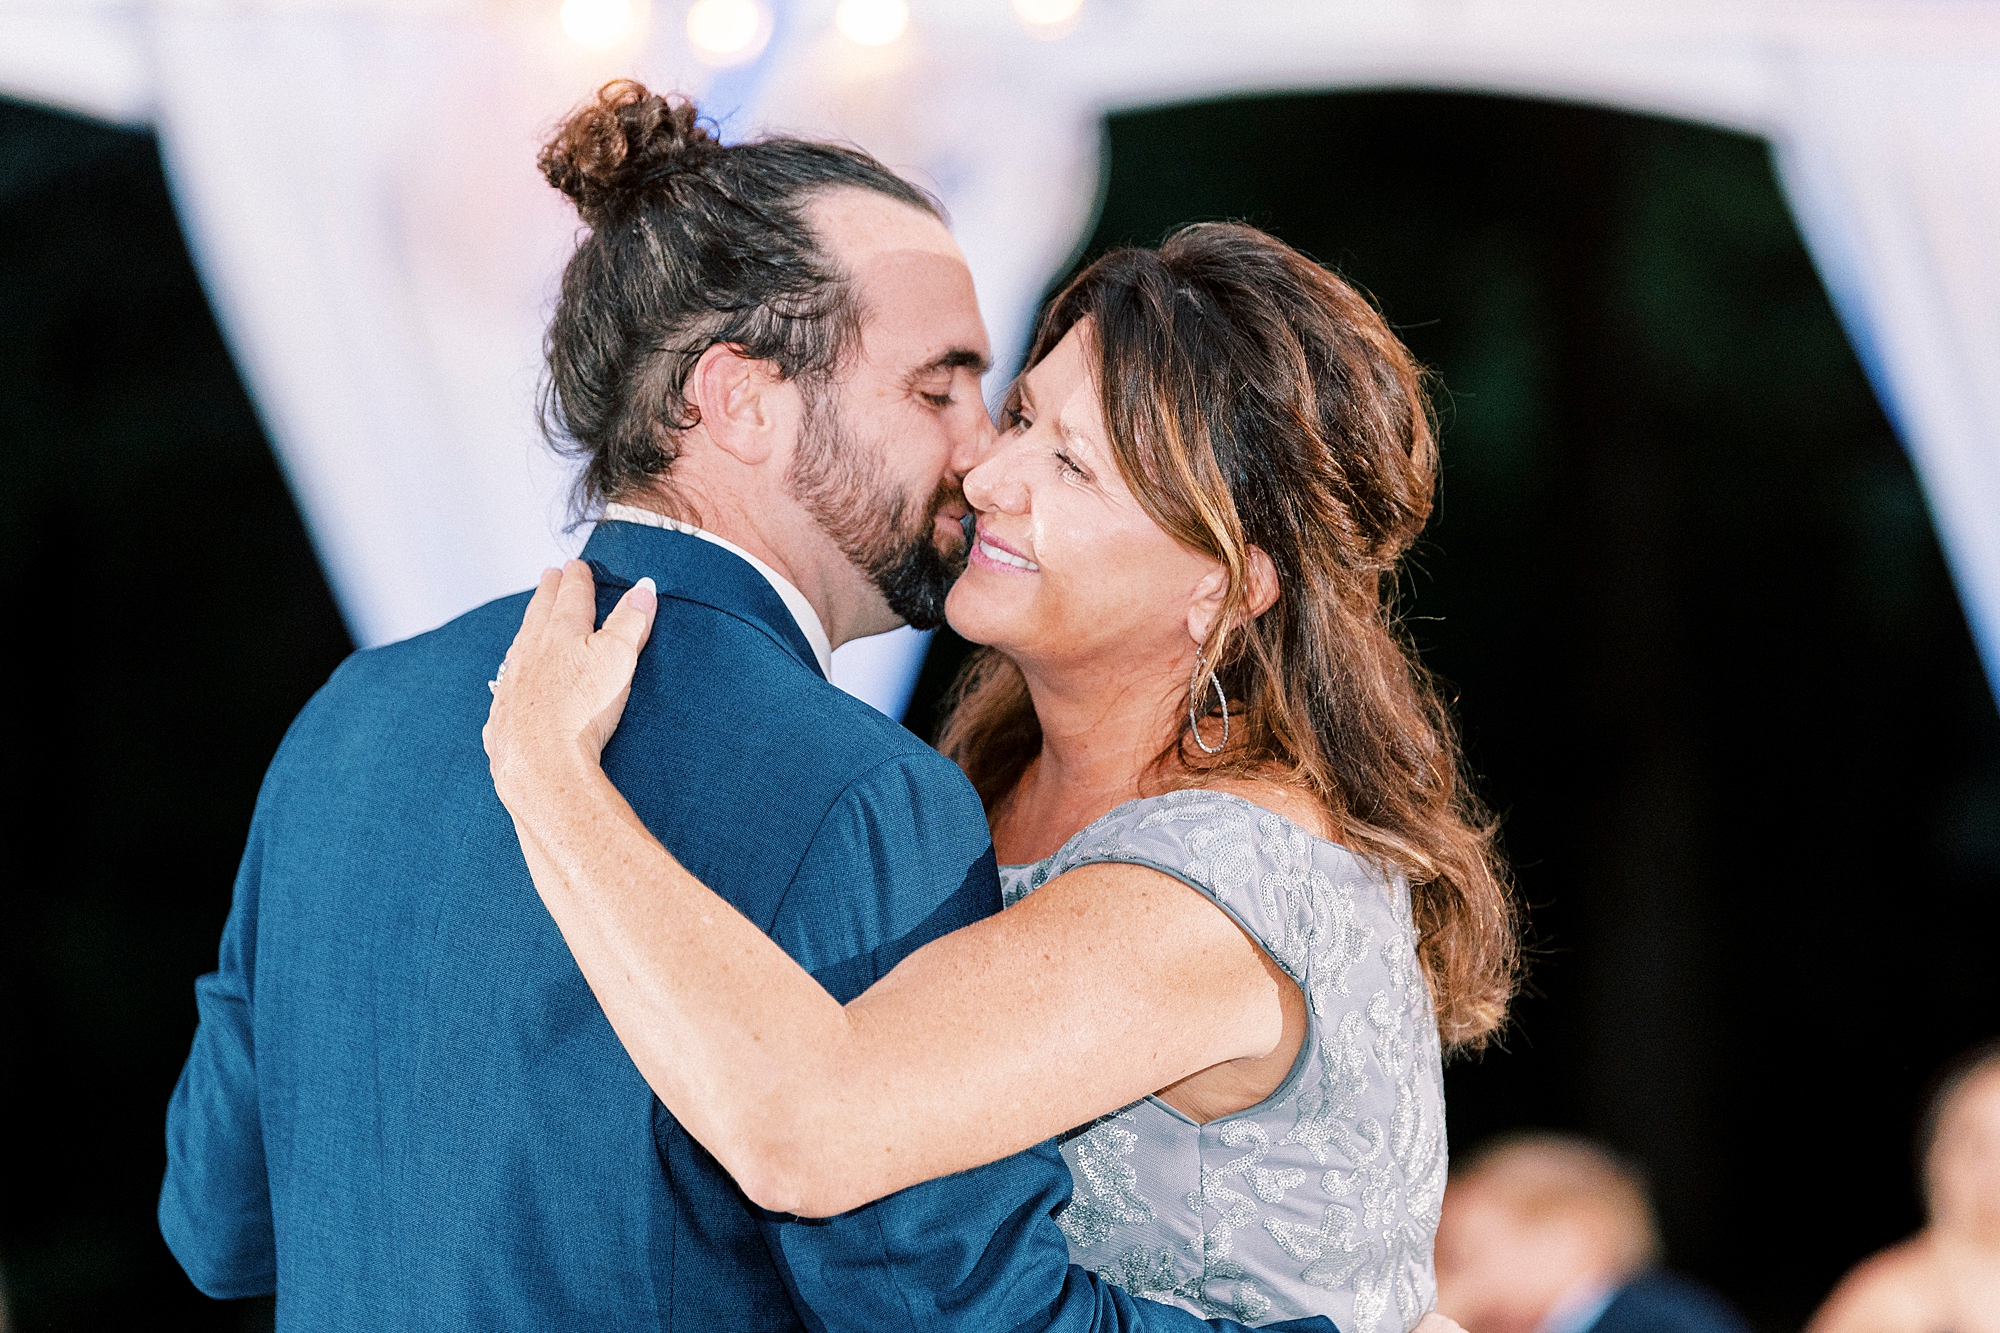 groom kisses mom on cheek during dance at reception